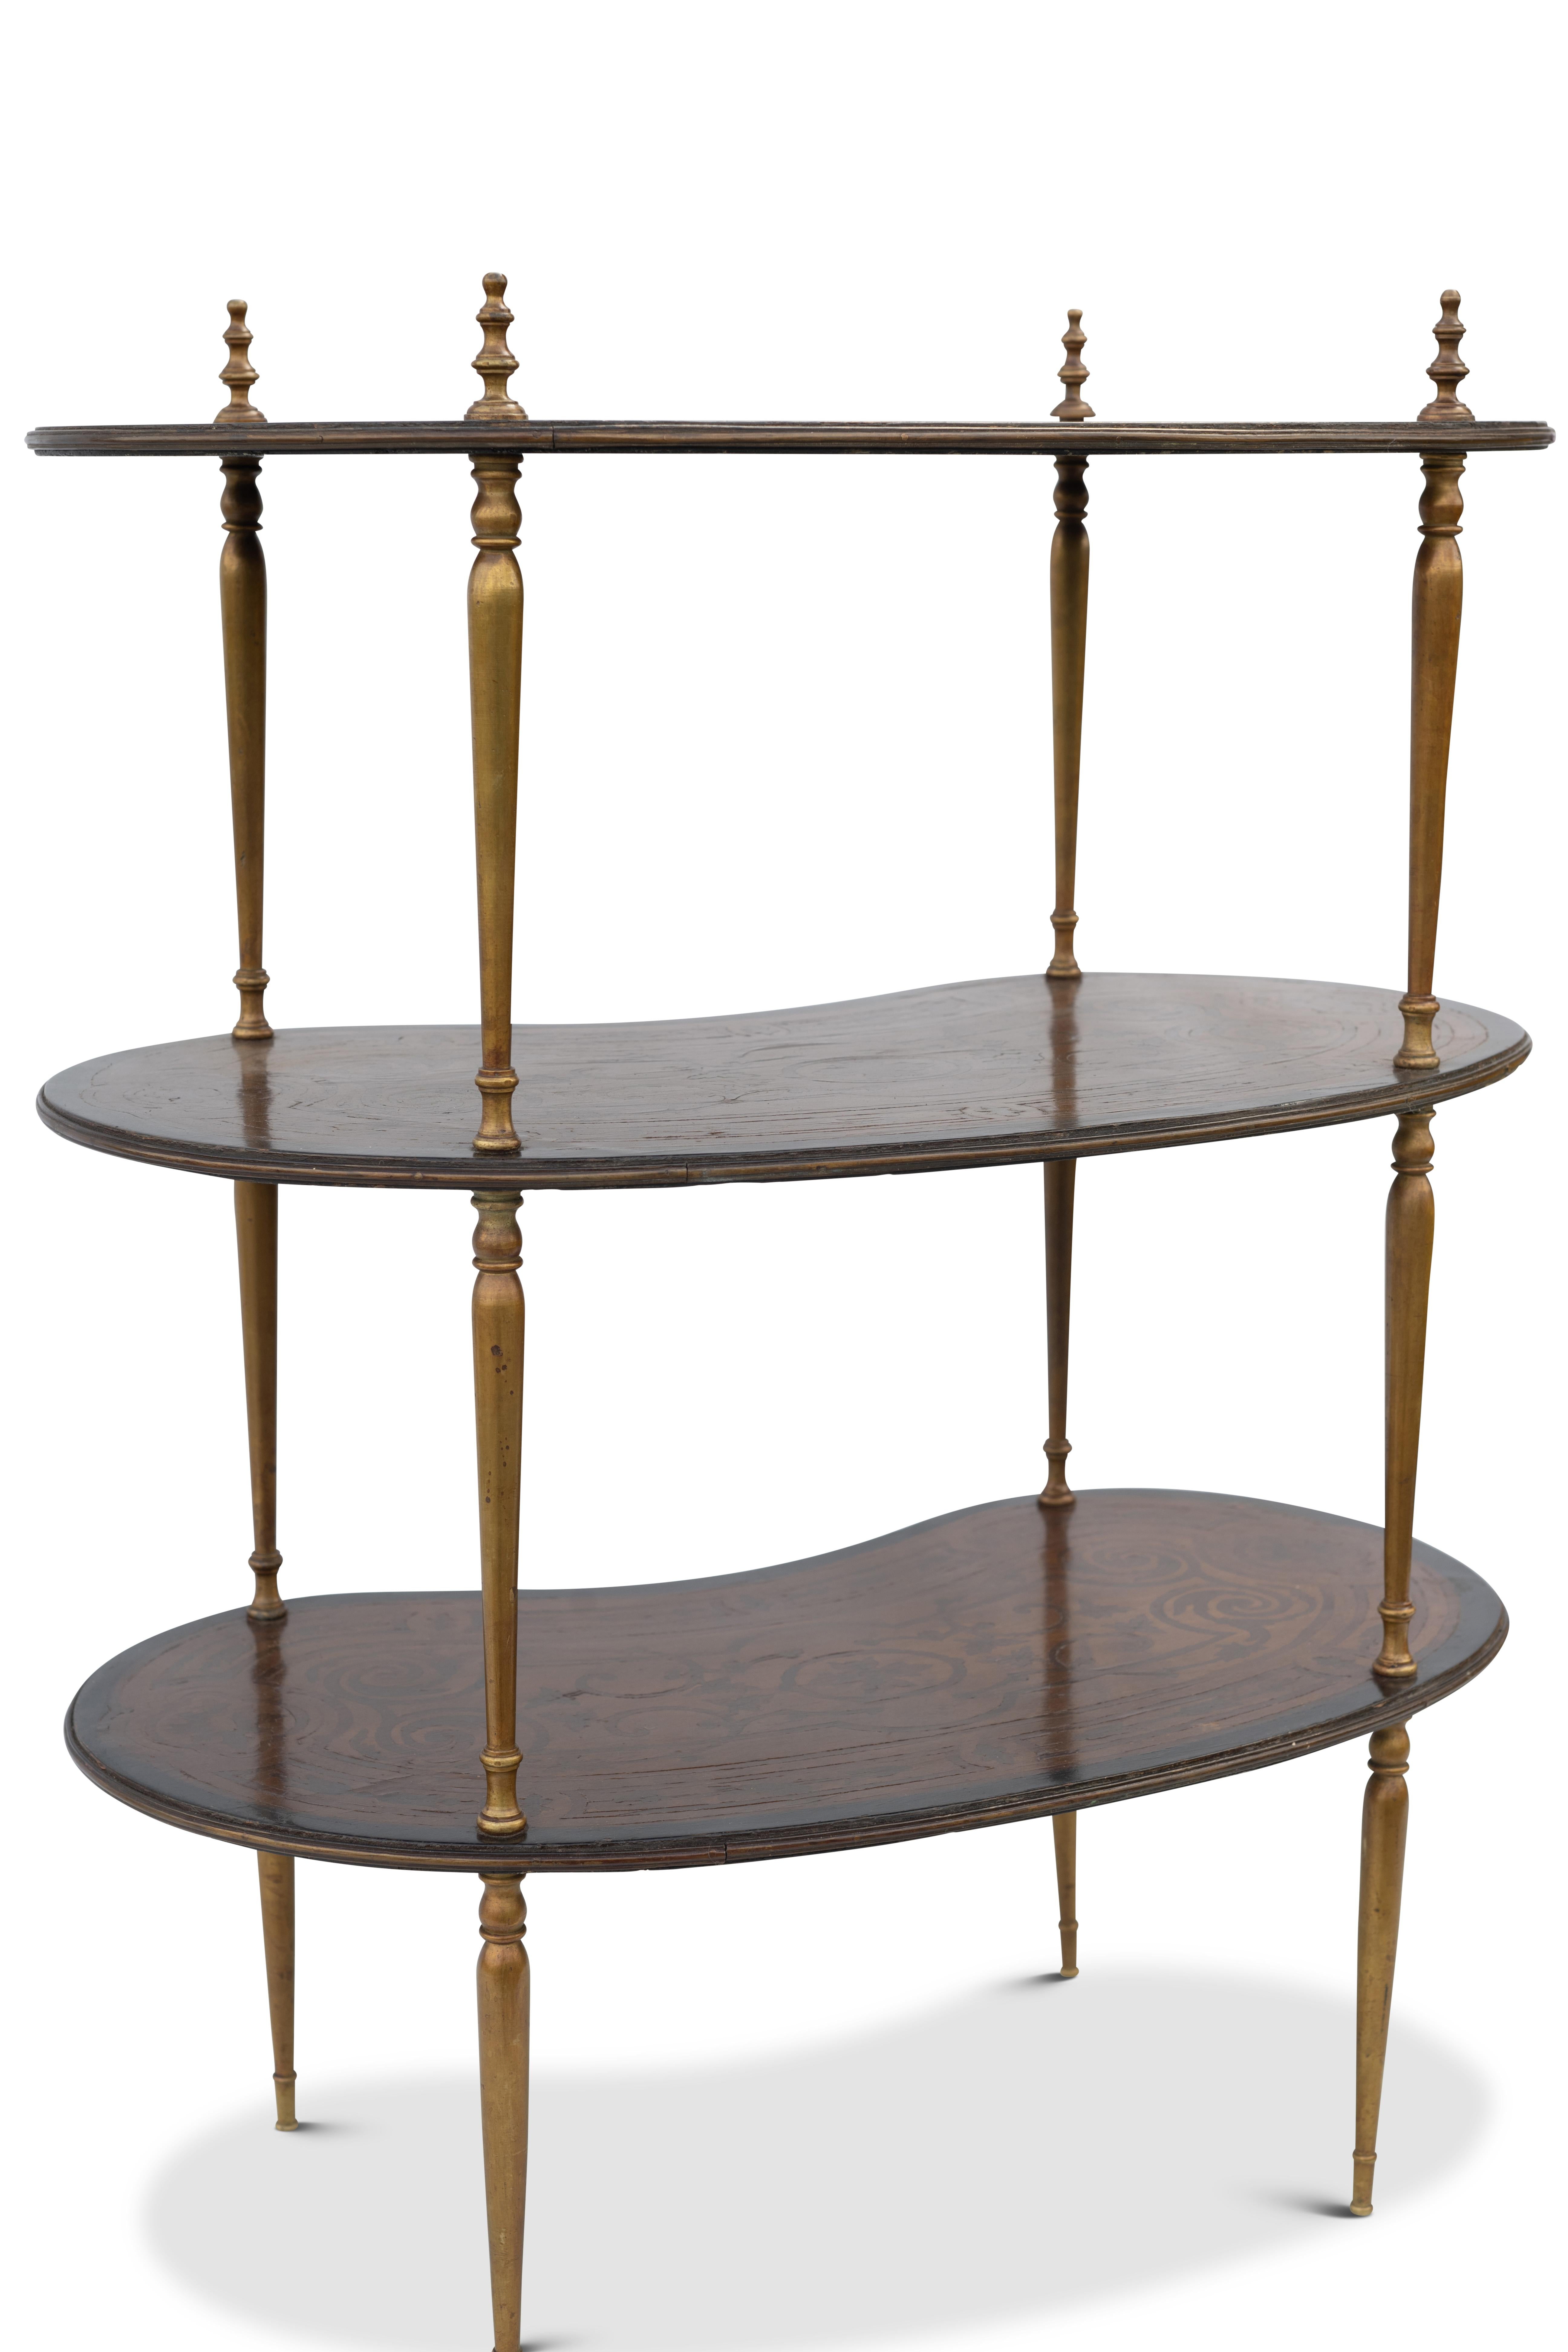 Victorian Continental Three-Tiered Kidney Shaped Brass & Marquetry Étagére 1880's Both Hand Painted & Varnished 

Would suit both period or modern day living spaces for entertaining guests with drinks, or using as a lamp table.
